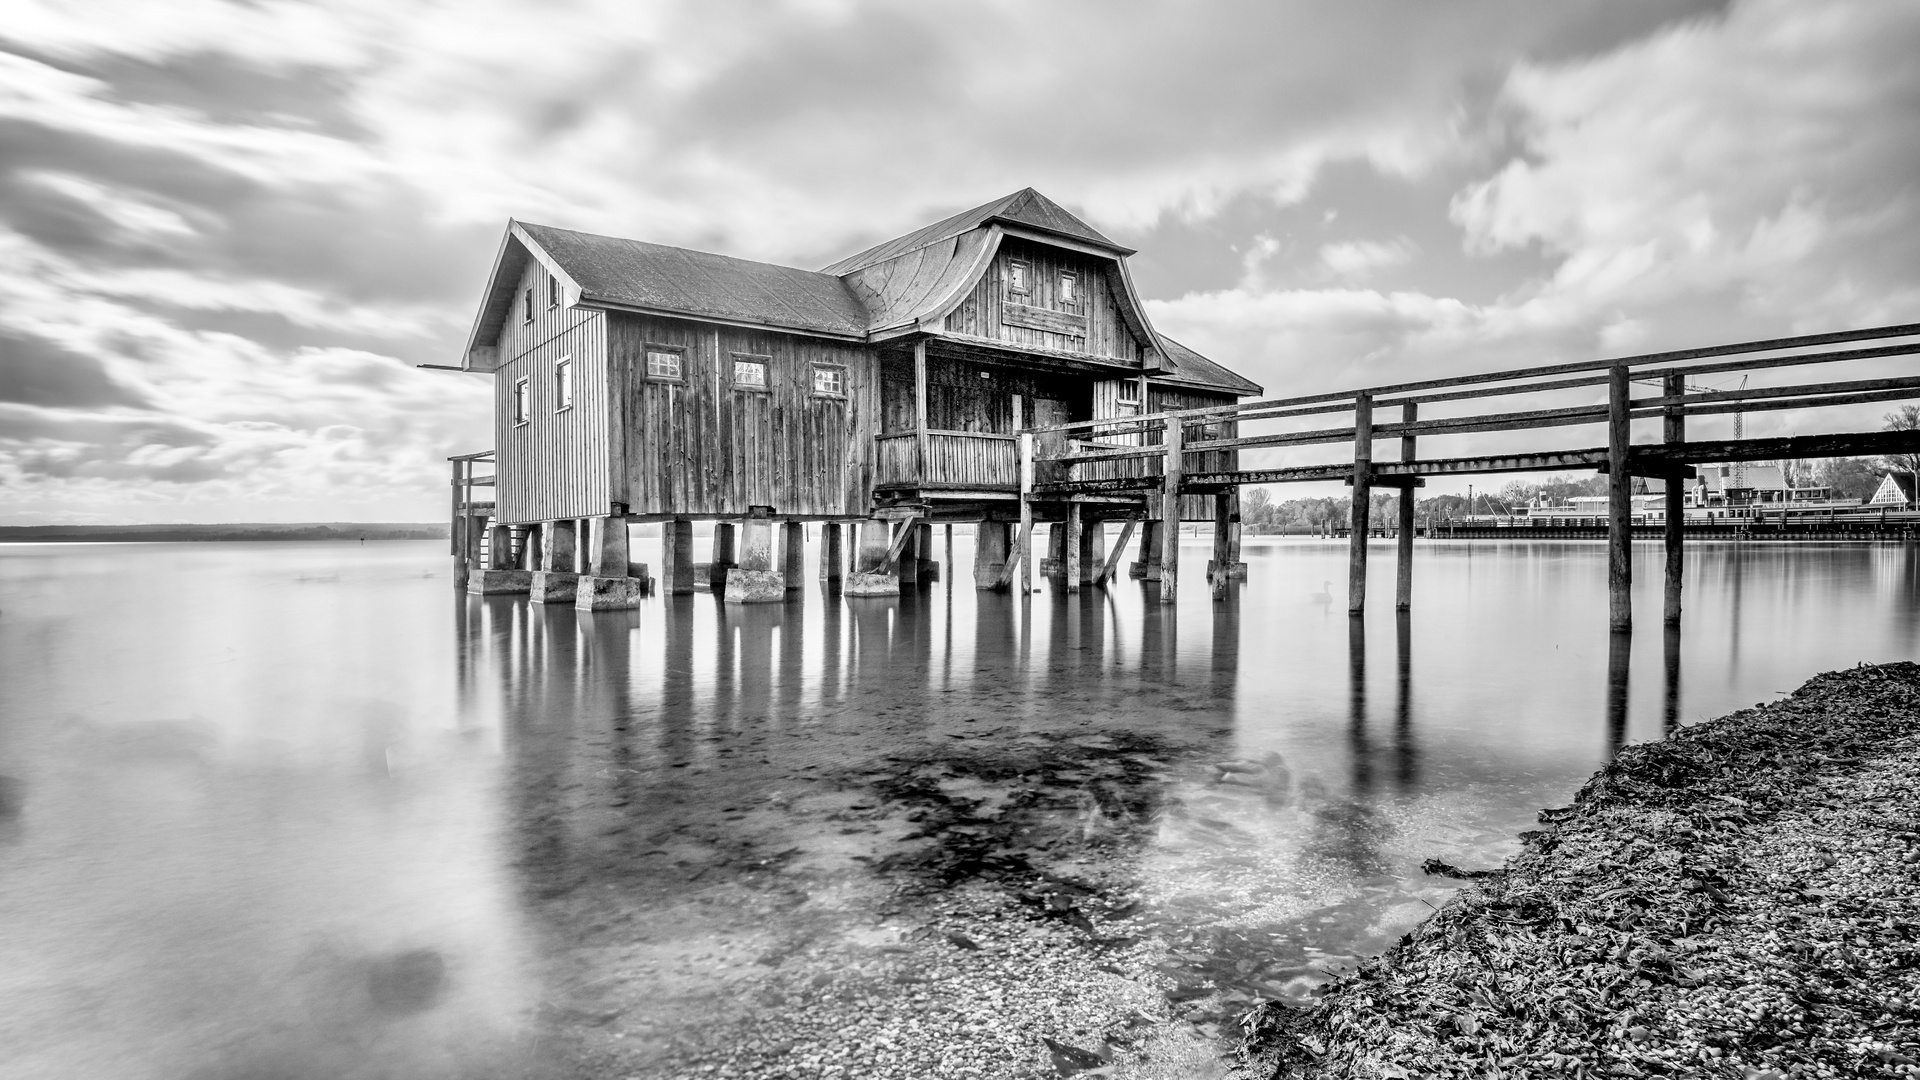 Bootshaus am Ammersee